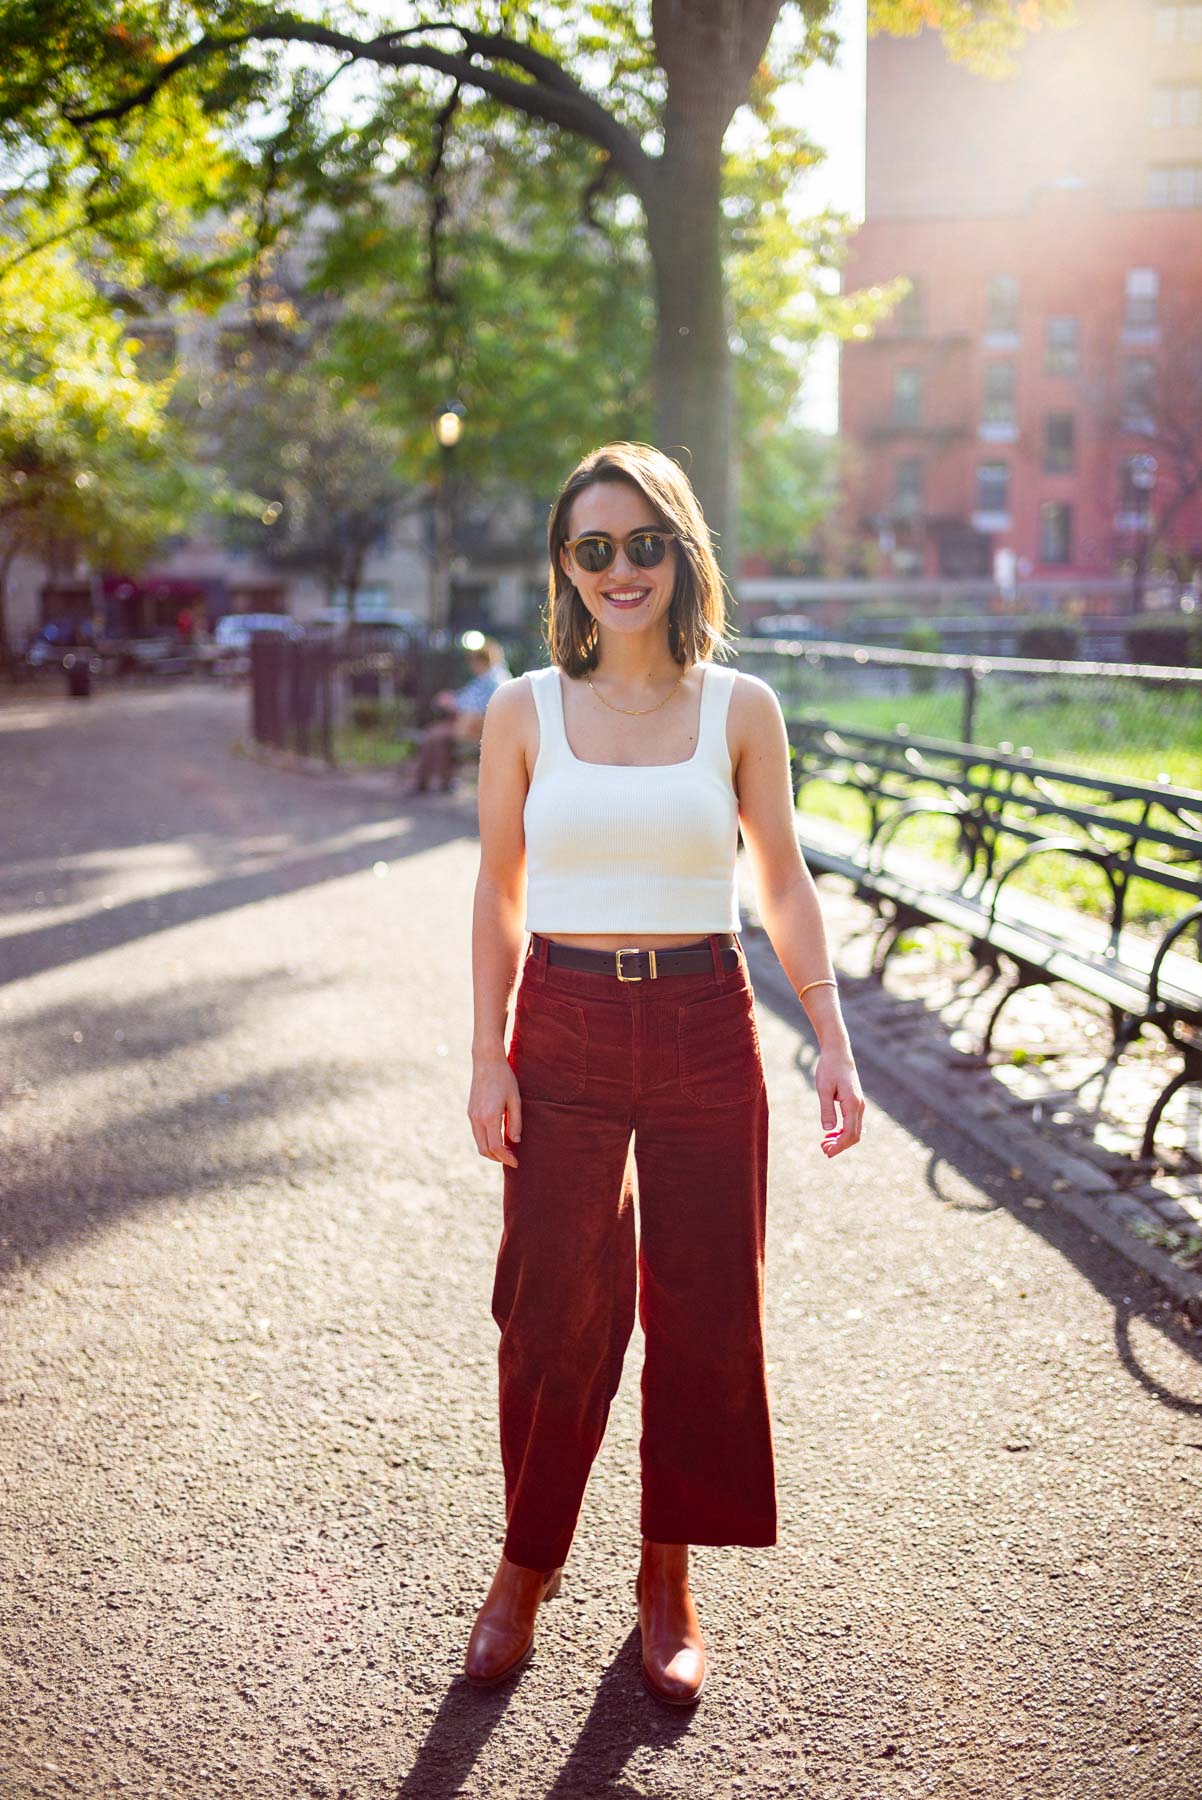 Smiling woman wearing a white tanktop and maroon wide-legged pants enjoying the sunshine at Tompkins Square Park with empty benches in the background